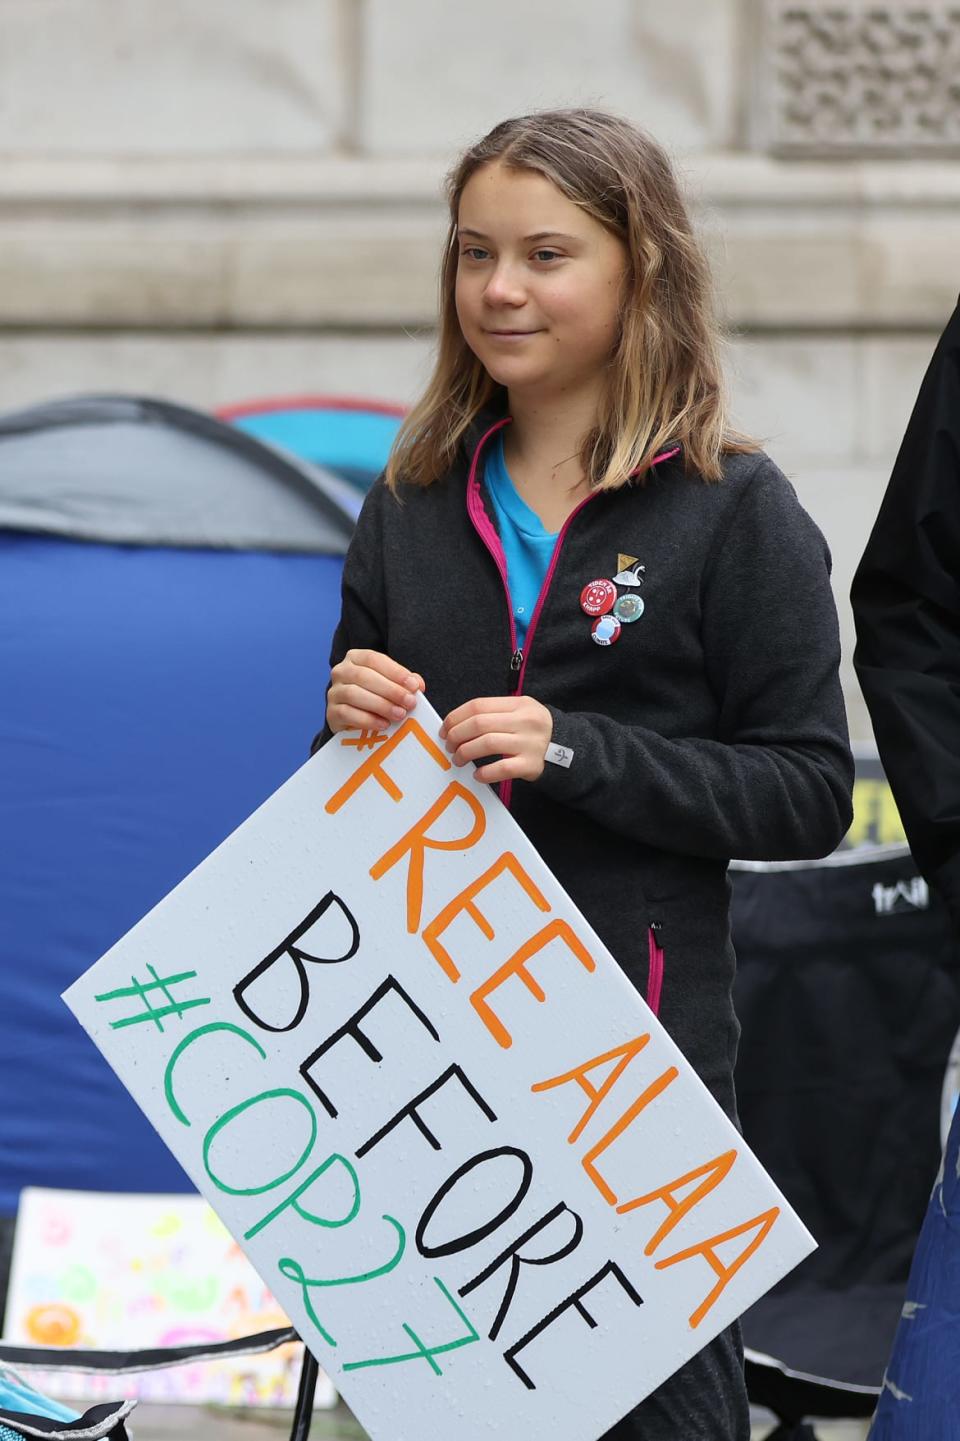 <div class="inline-image__caption"><p>Climate activist Greta Thunberg protested the imprisonment of British-Egyptian activist Alaa Abd El-Fattah on October 30, 2022 in London, England ahead of COP27. </p></div> <div class="inline-image__credit">Hollie Adams via Getty</div>